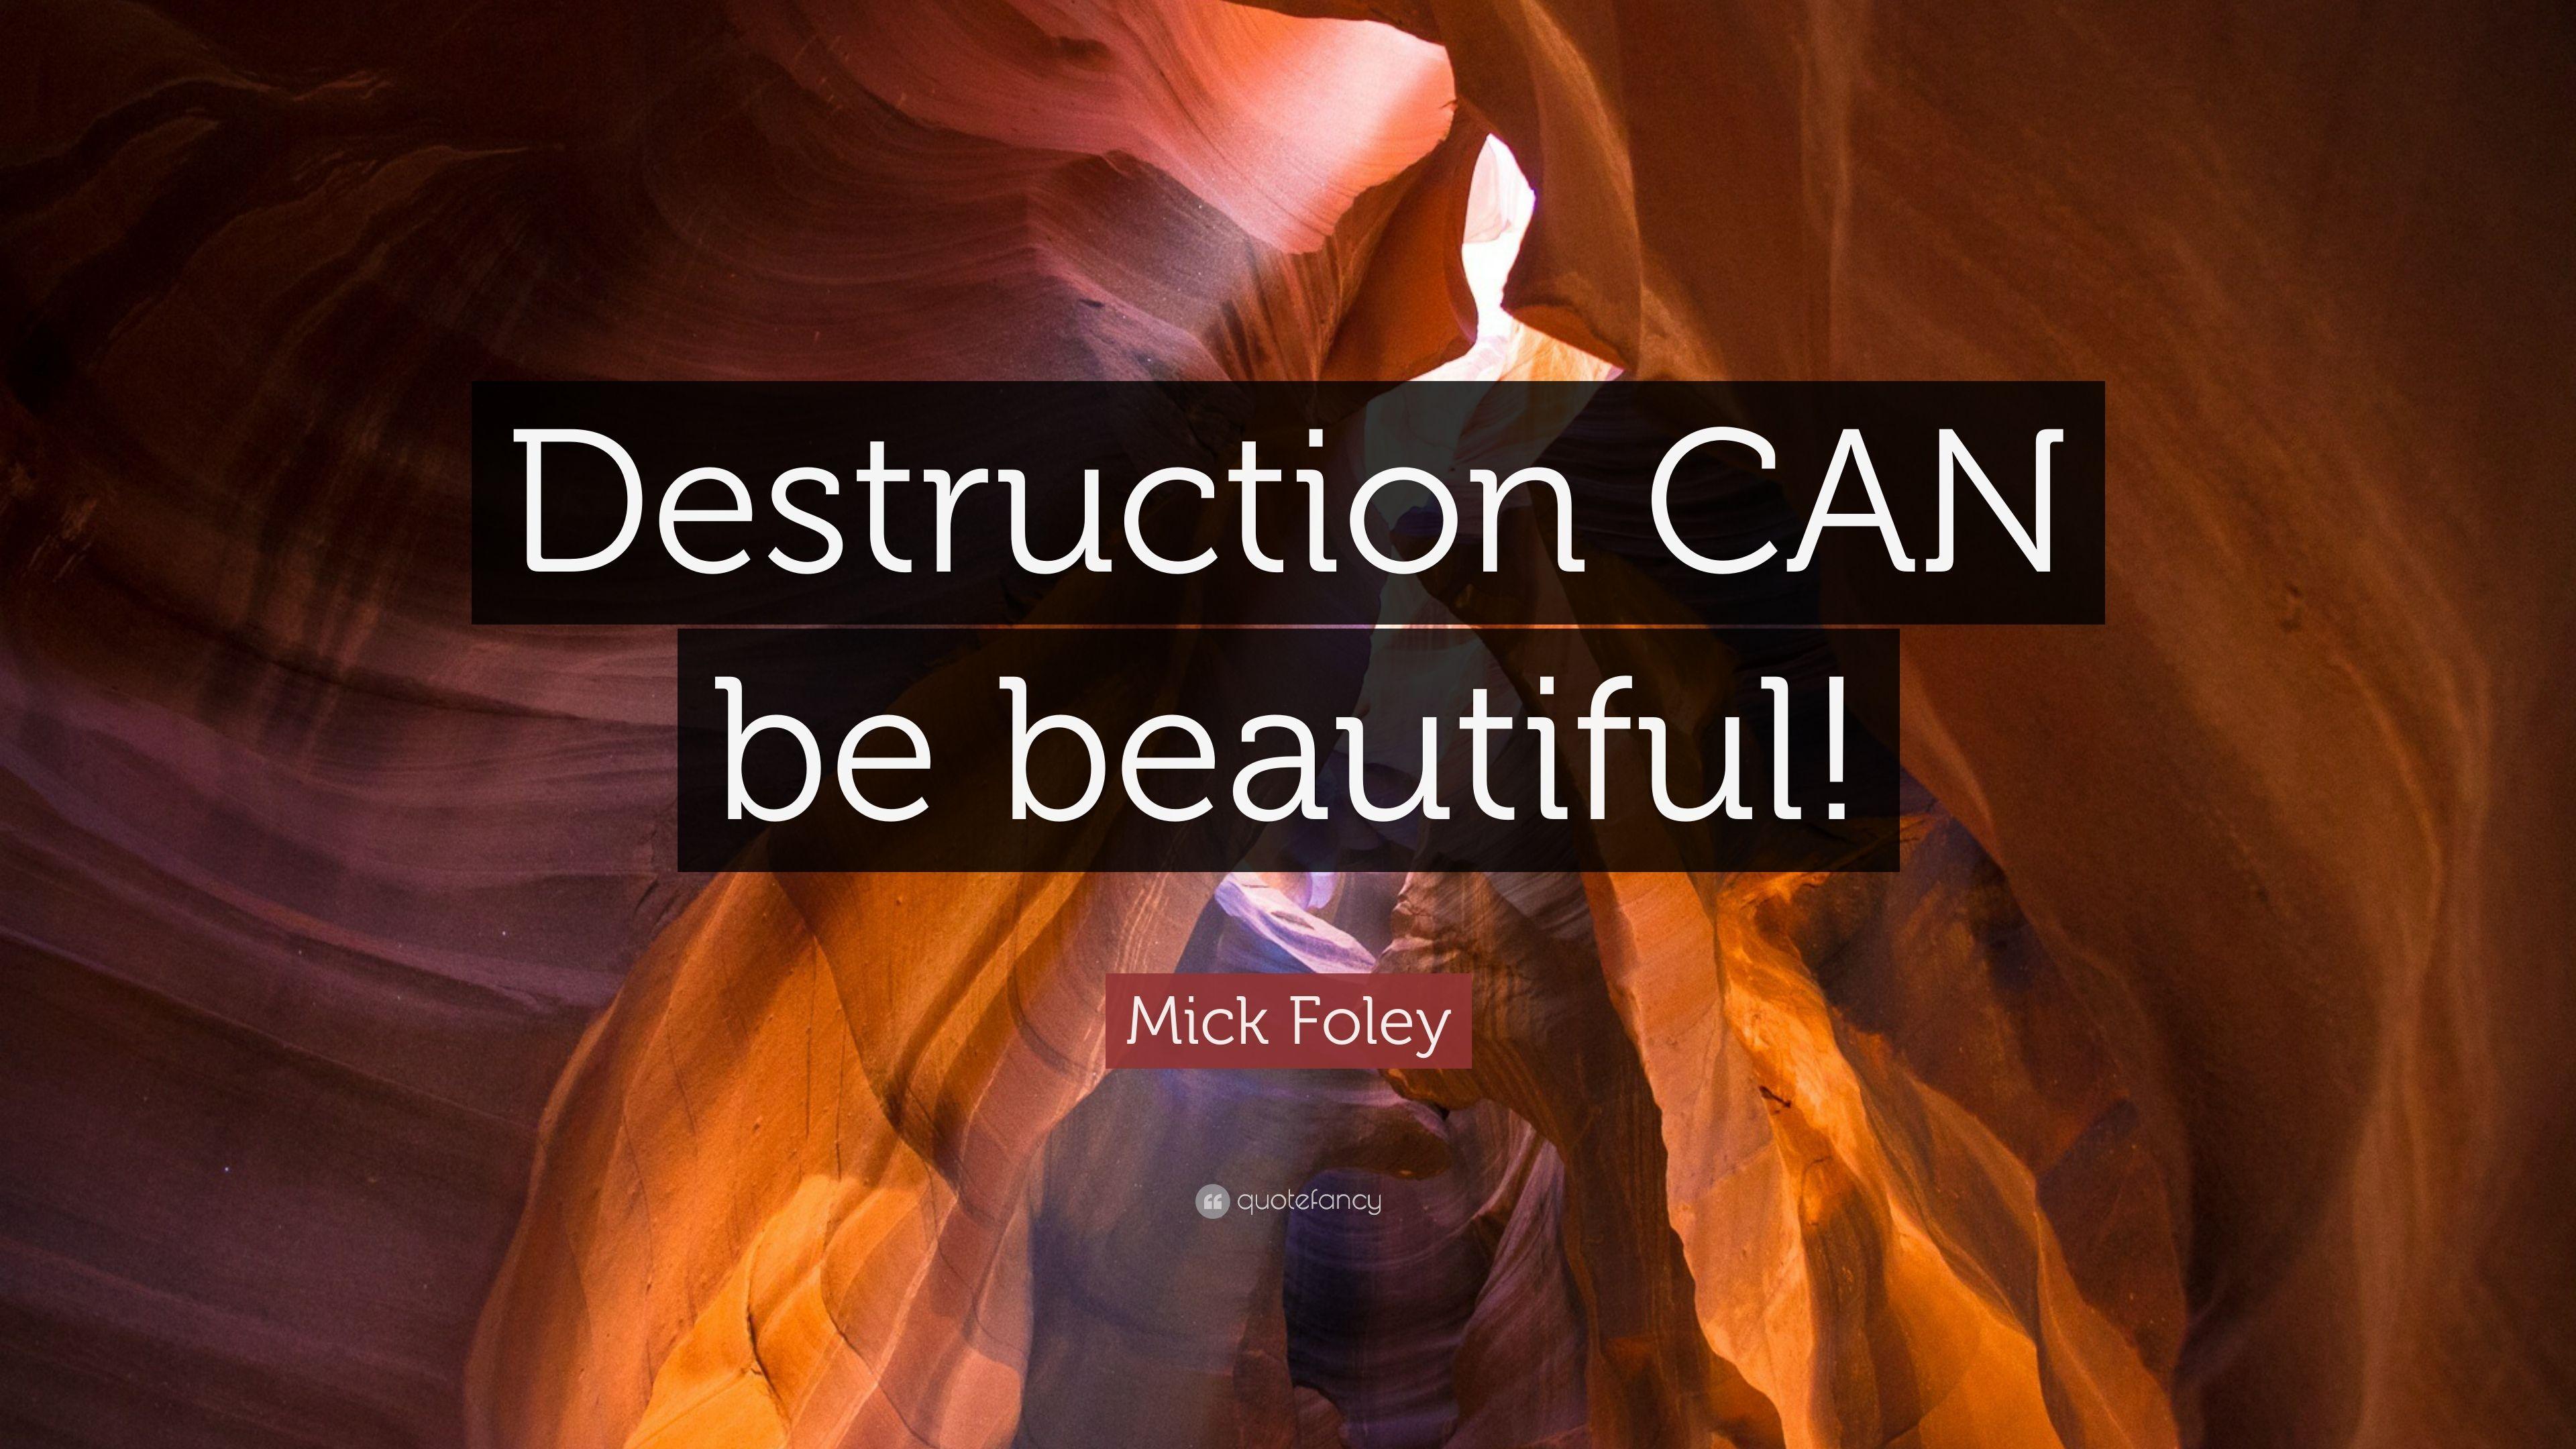 Mick Foley Quote: “Destruction CAN be beautiful!” 7 wallpaper